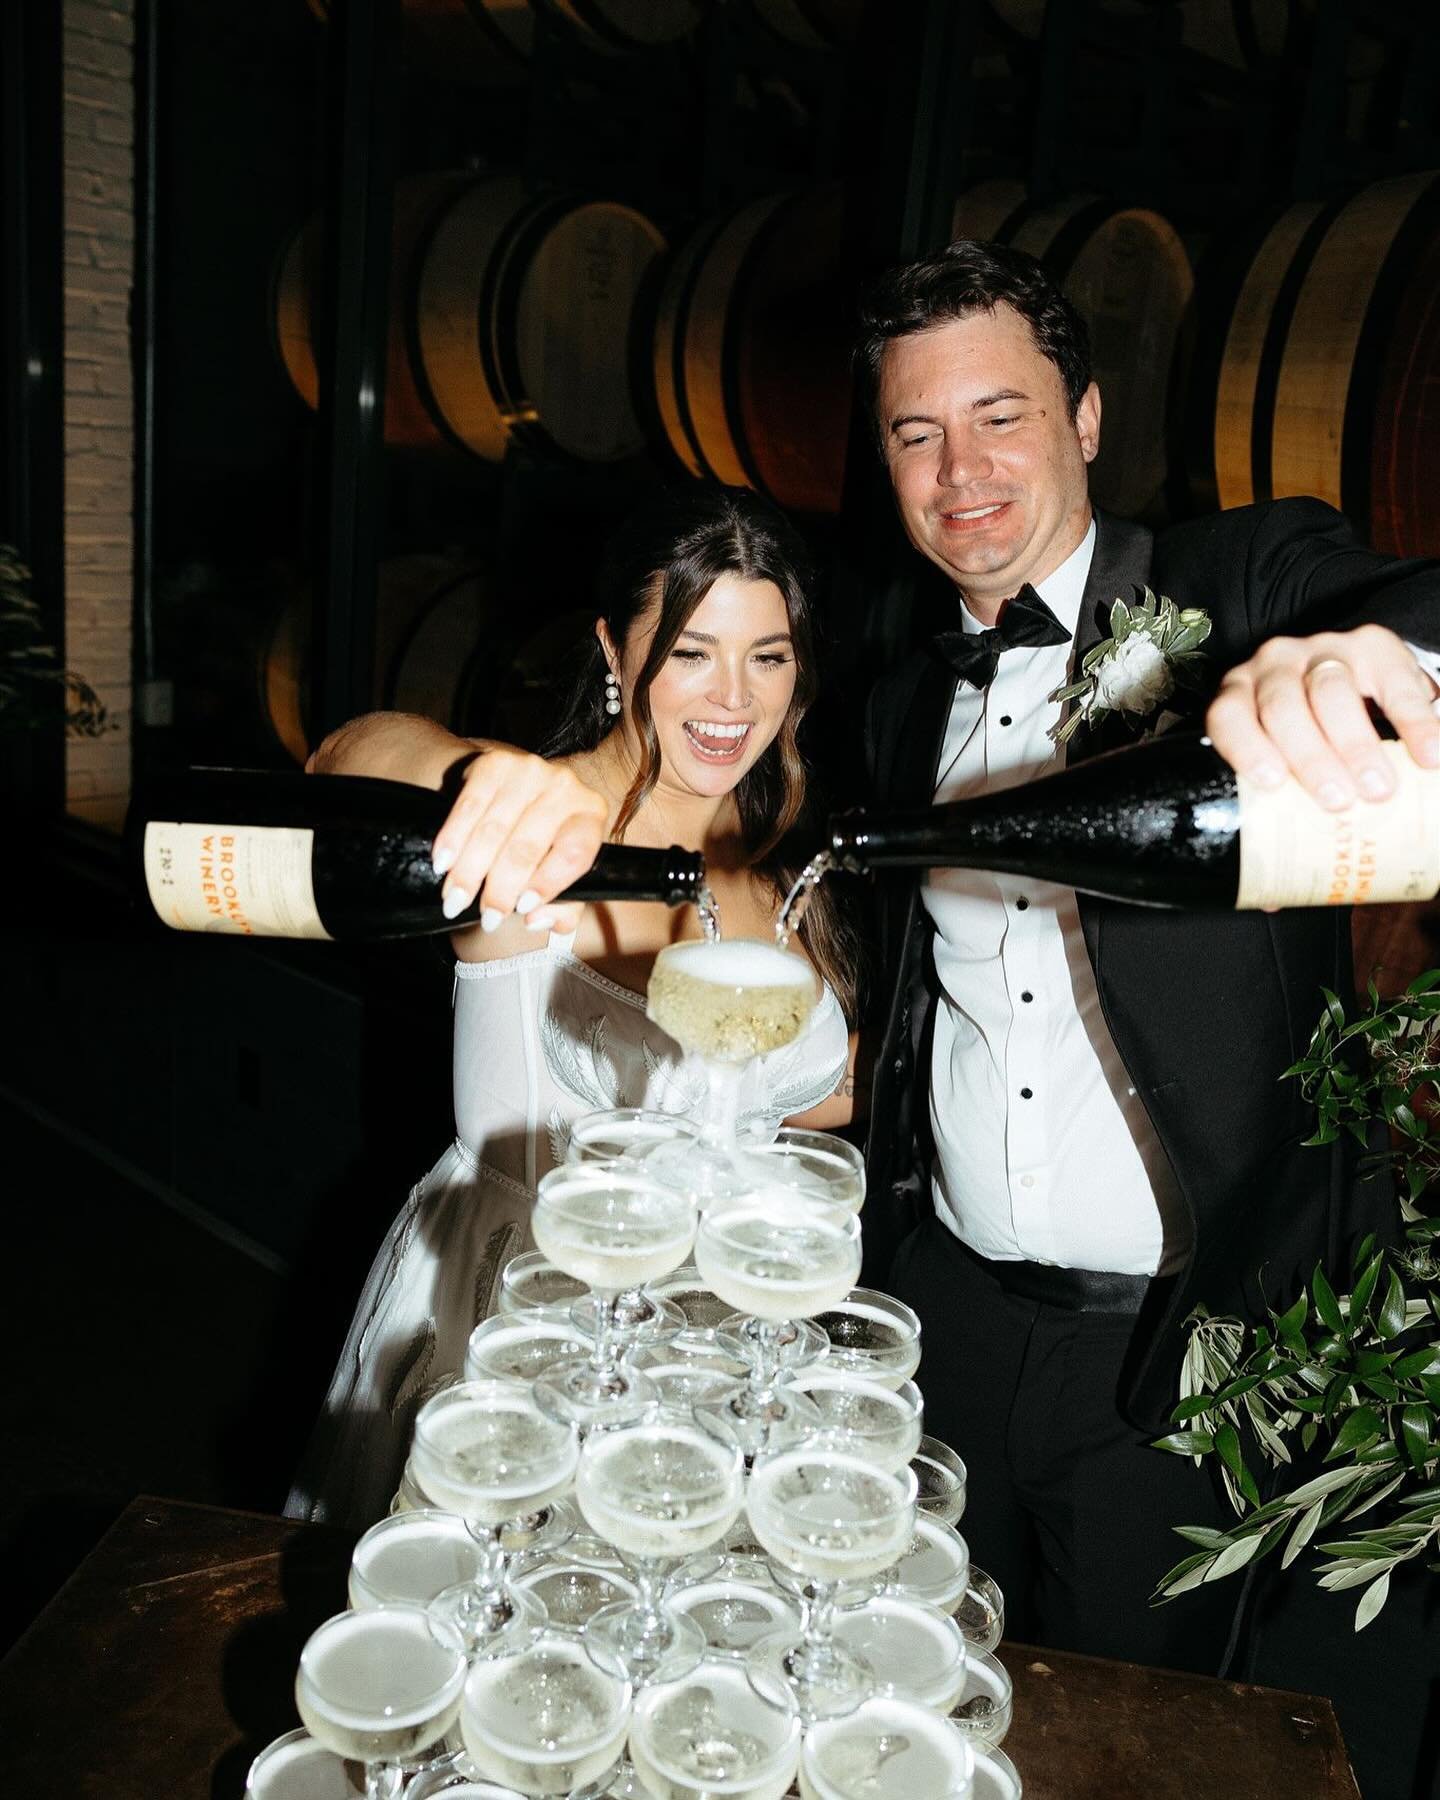 Did someone say champagne? 
.
Photo @afteritallco 
Venue @brooklynwinery 
Beauty @willowhouse.beauty makeup by ava | hair by eduardo